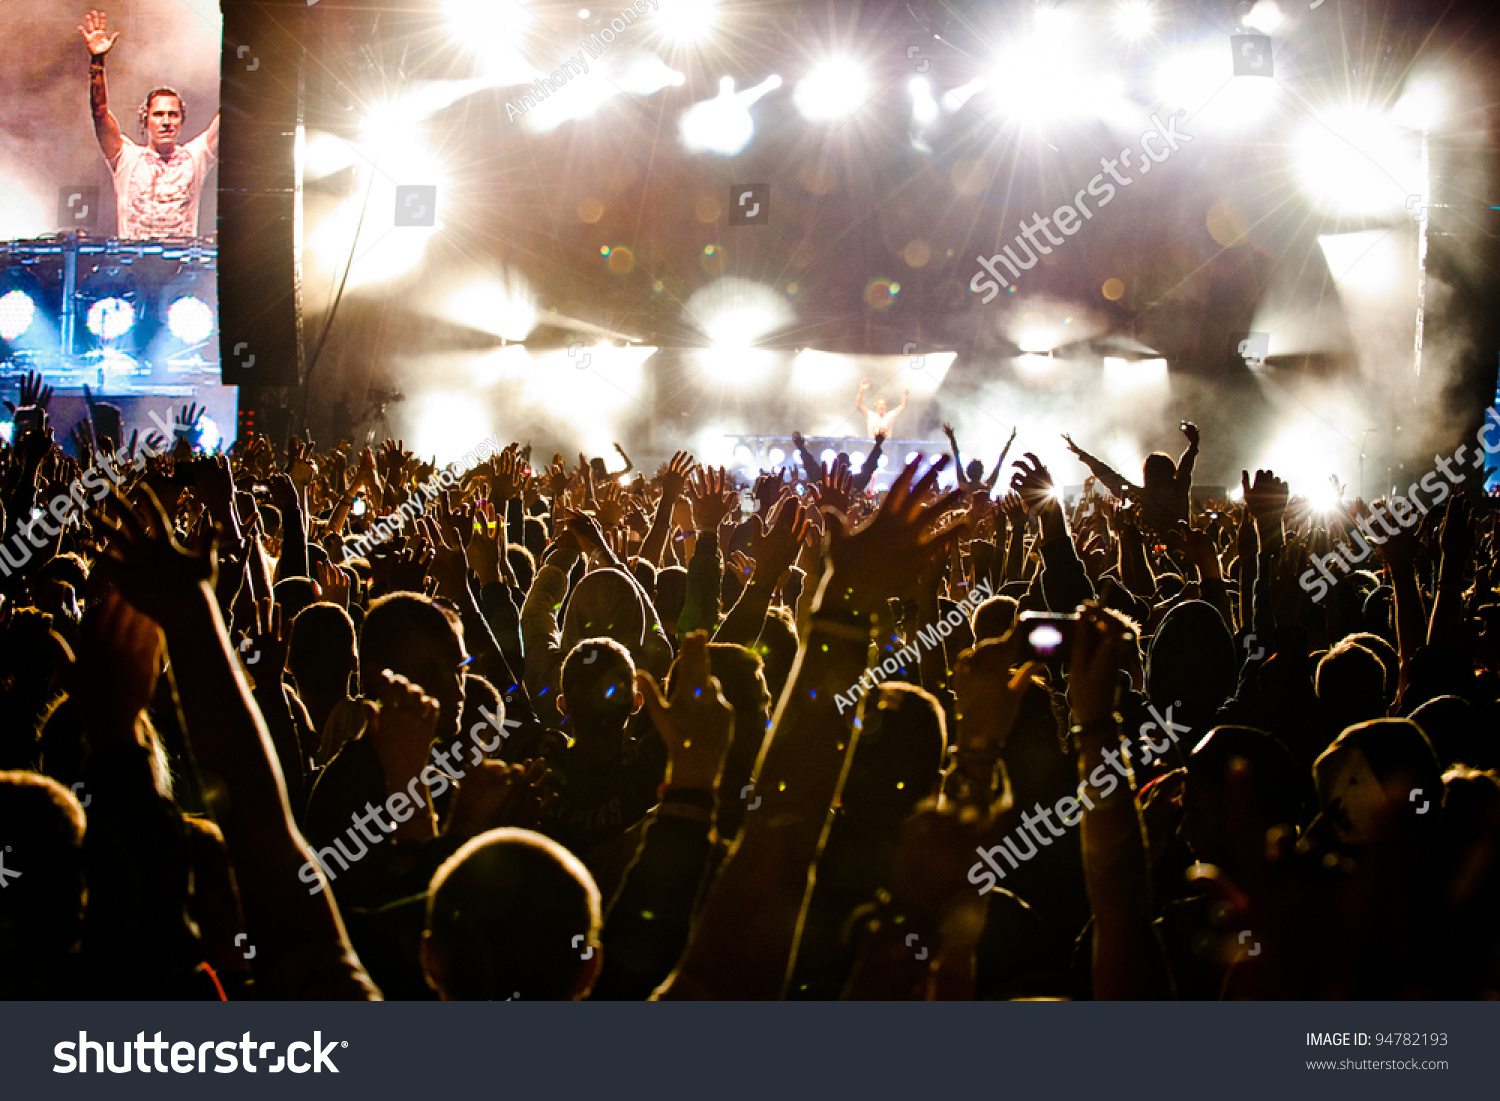 Festival Crowd - Tiesto Main Stage Hands In Air Stock Photo 94782193 ...